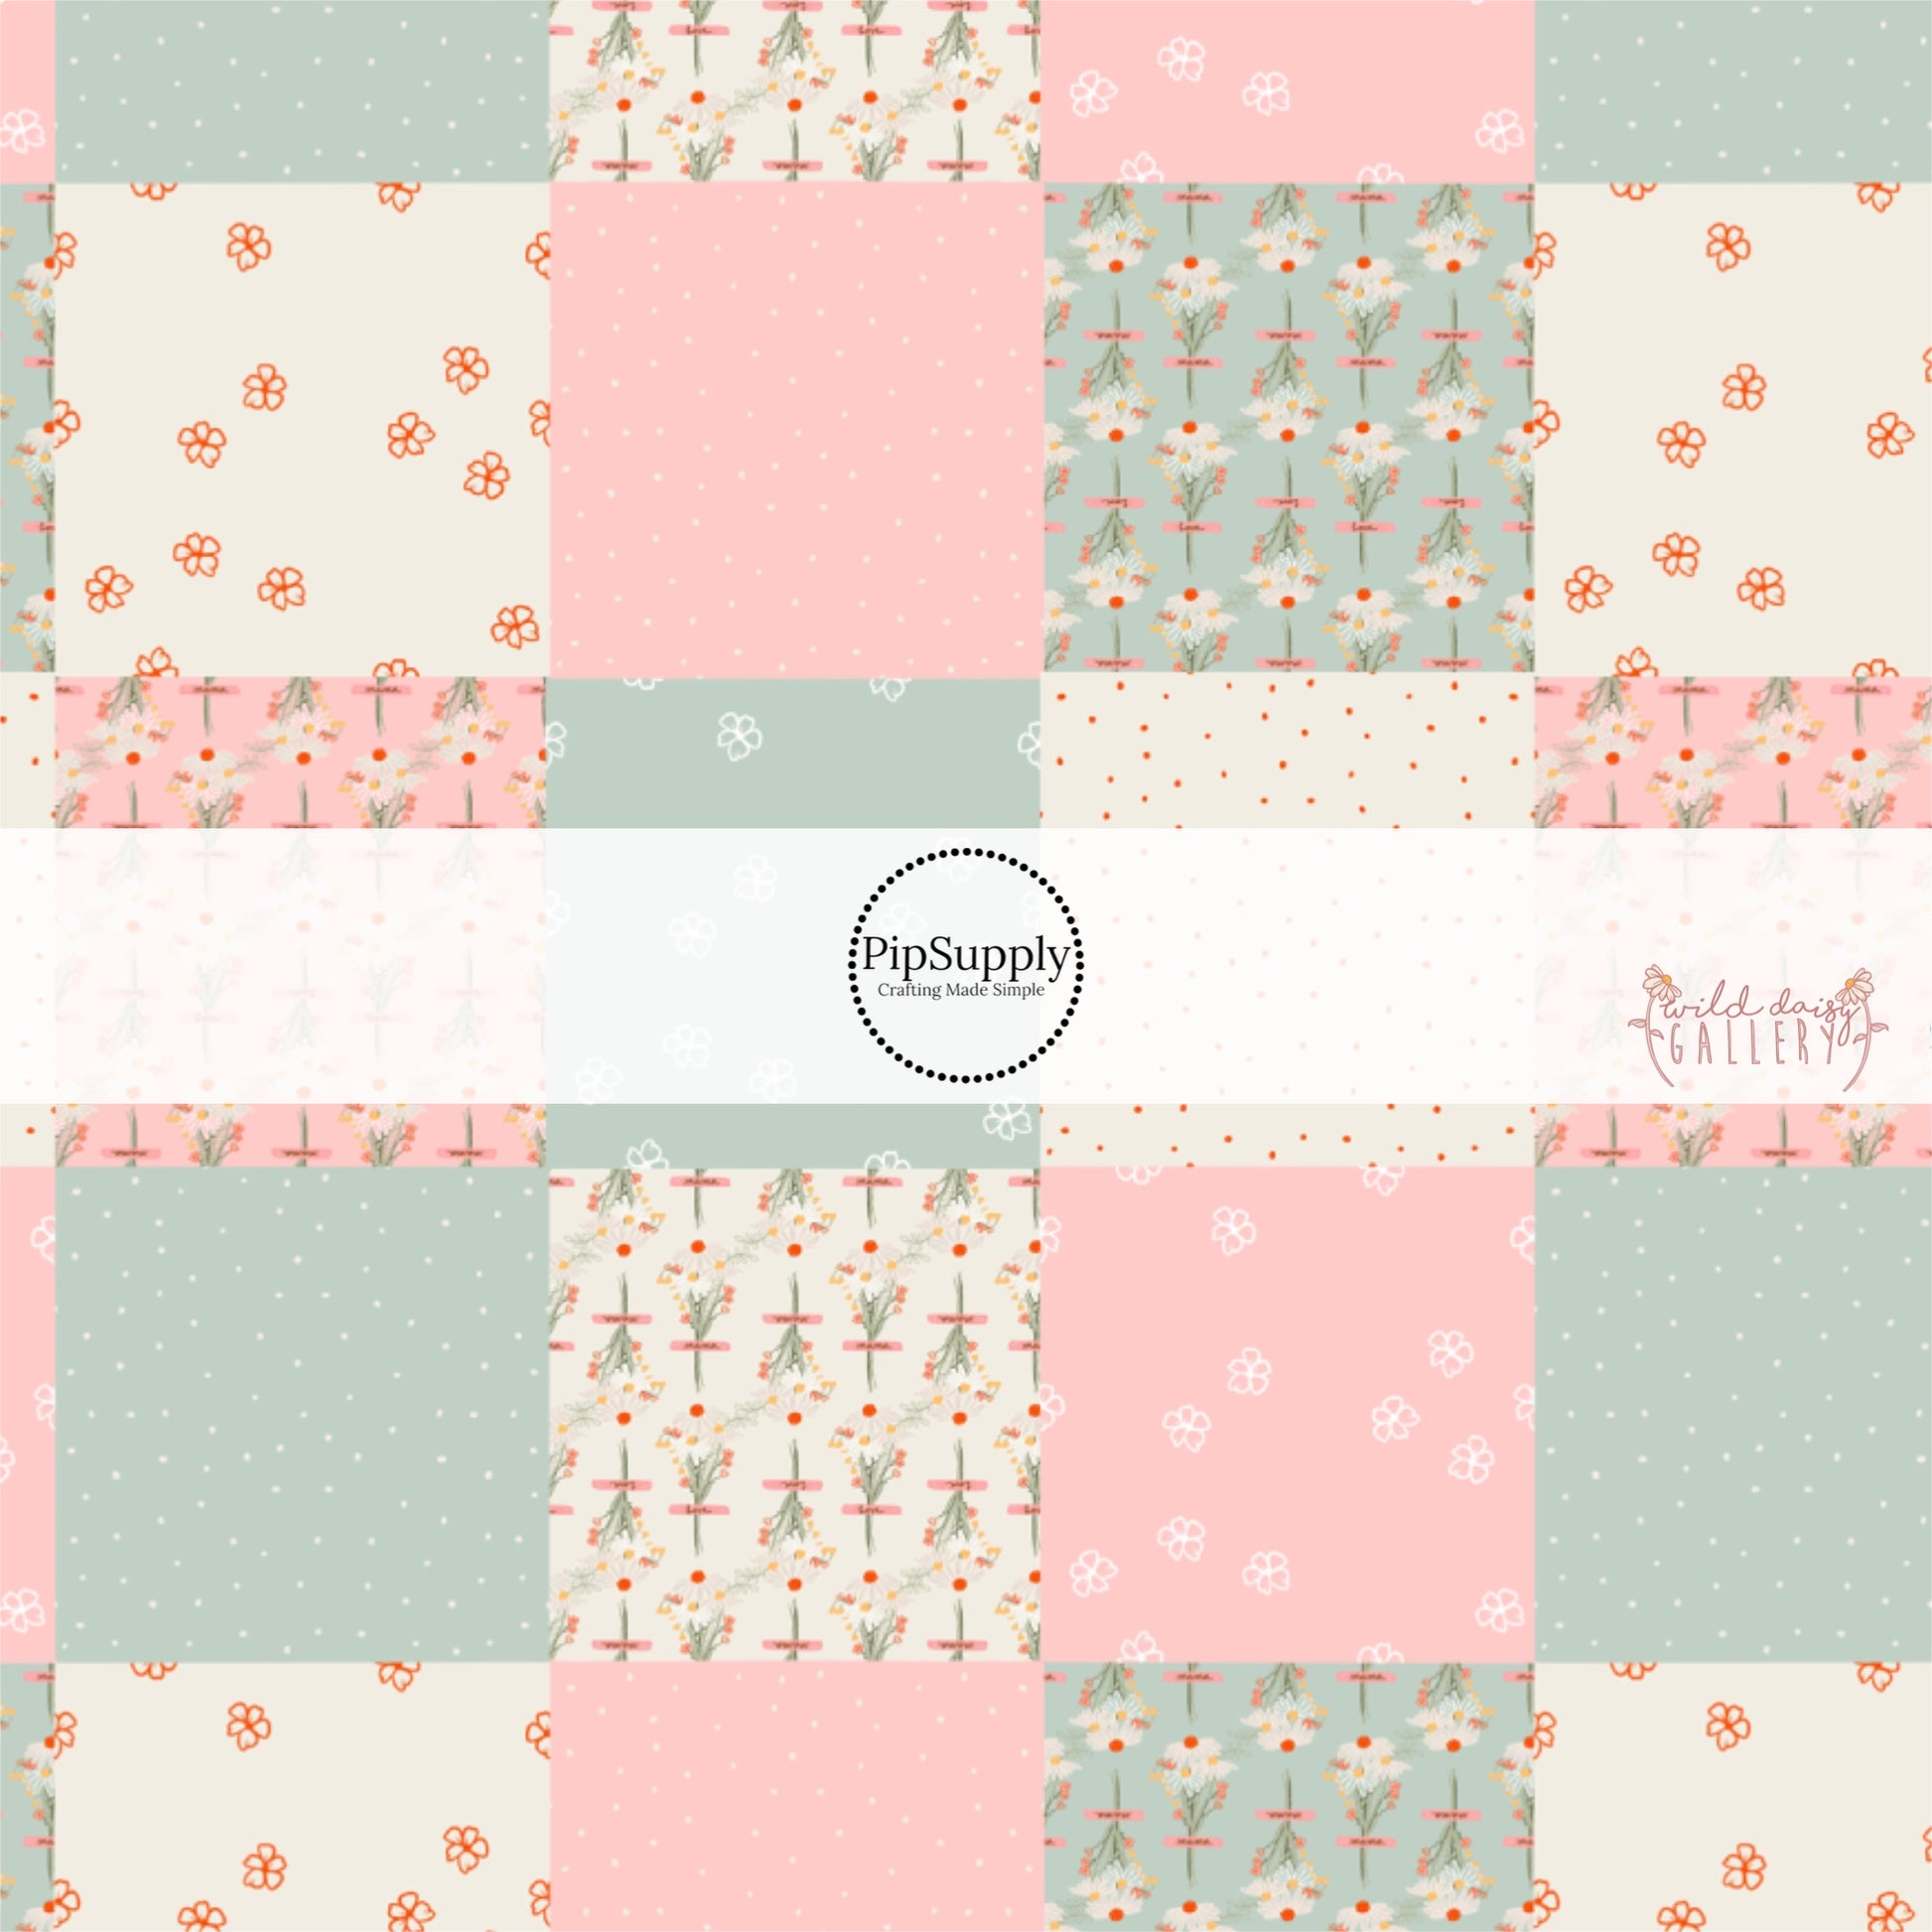 These spring daisy outlines and dots themed pastel pink, cream, and light seafoam green fabric by the yard features patchwork with daisy bouquets, outlined daisies, and small scattered dots. 